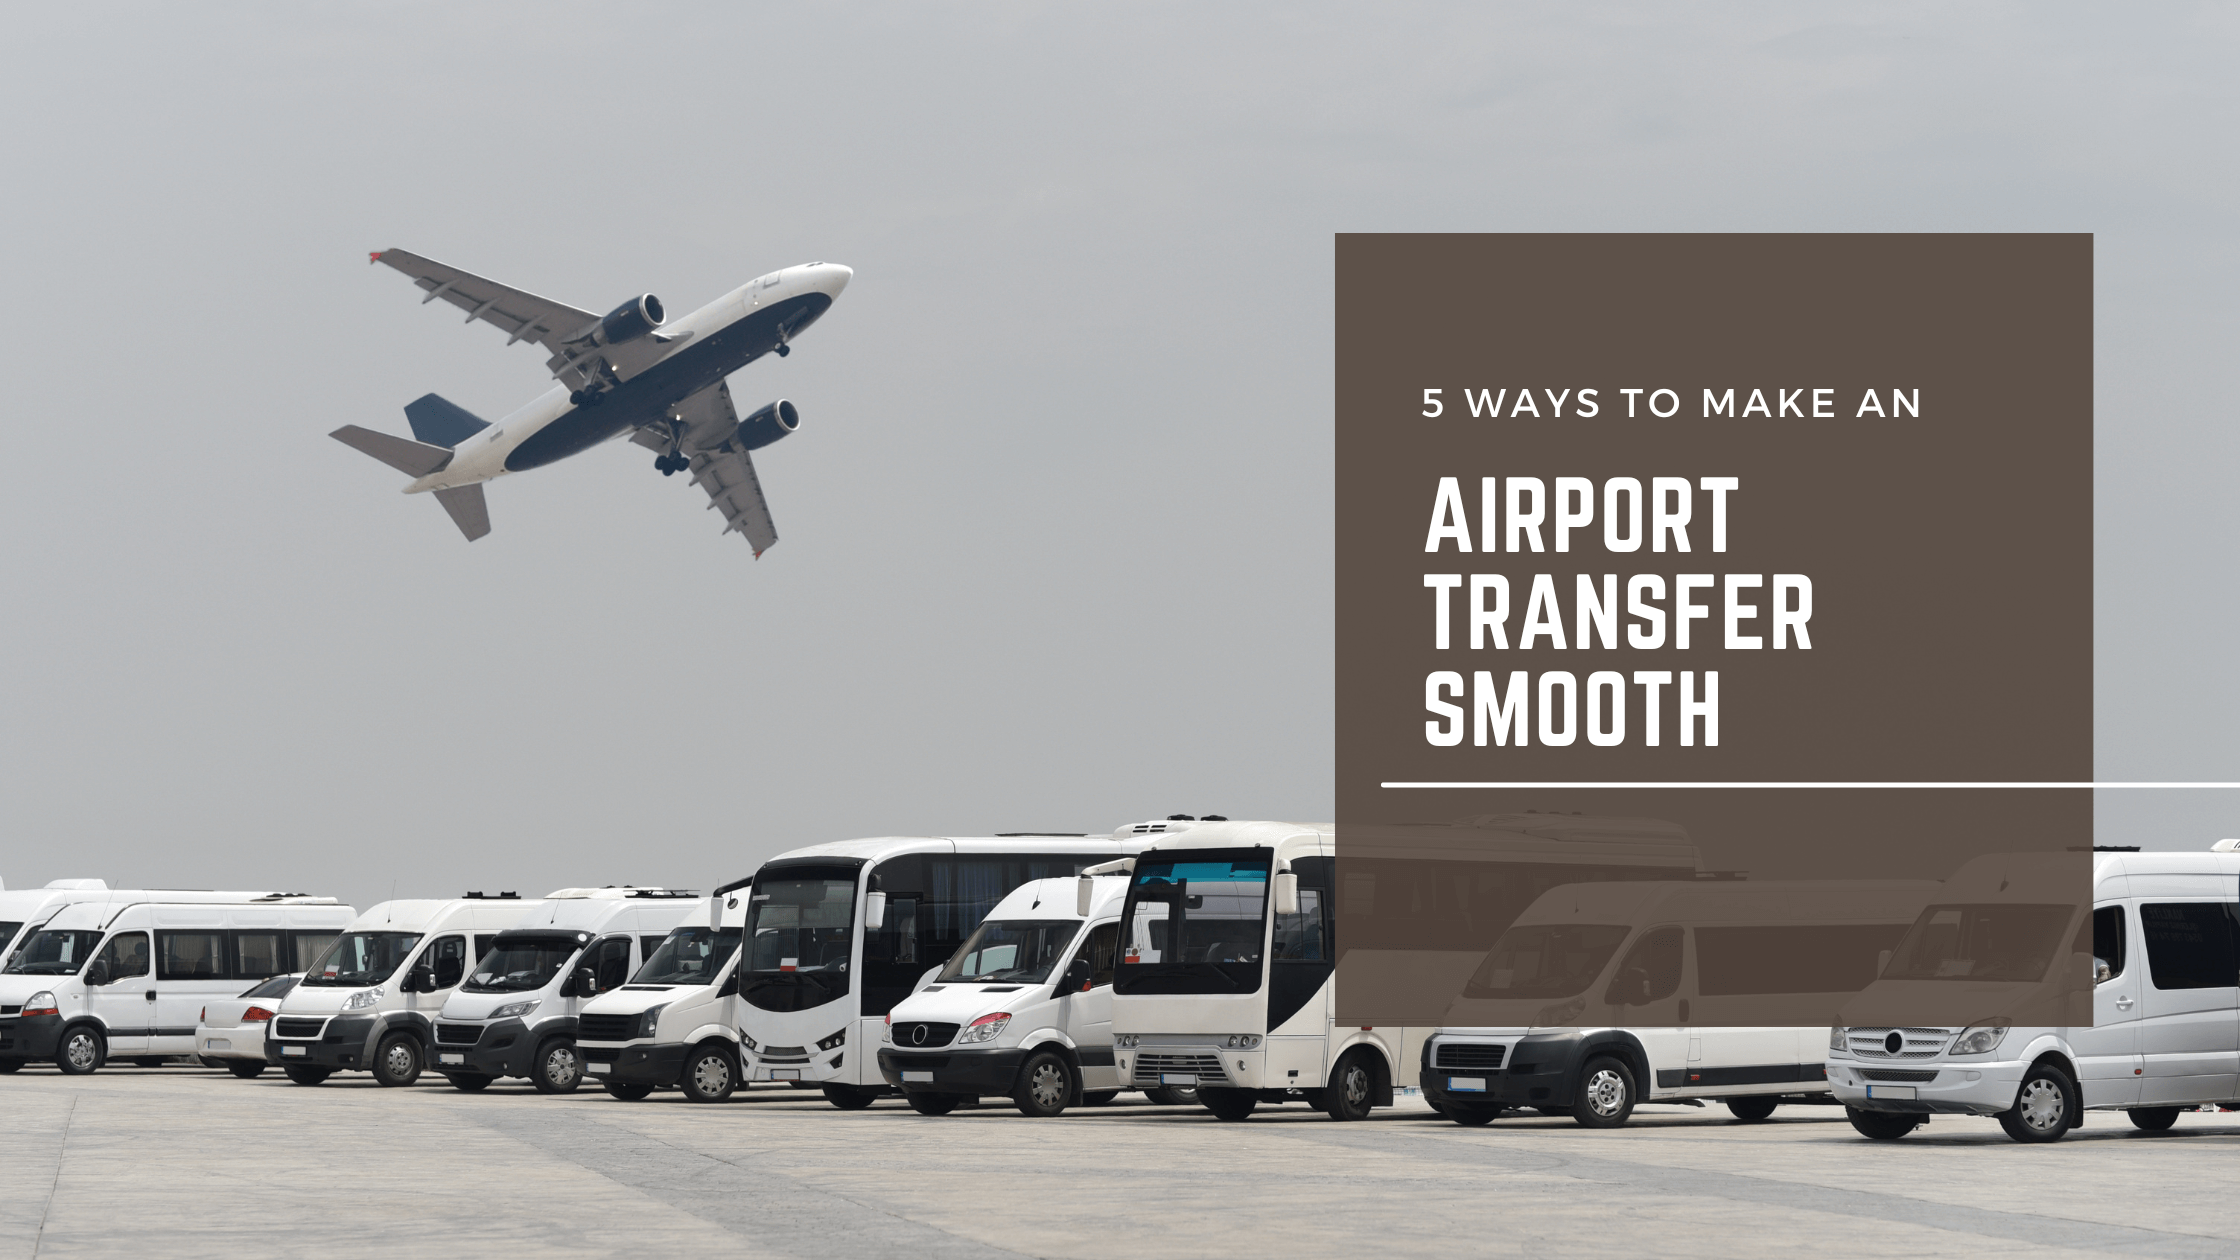 5 Ways to Make an Airport Transfer Smooth